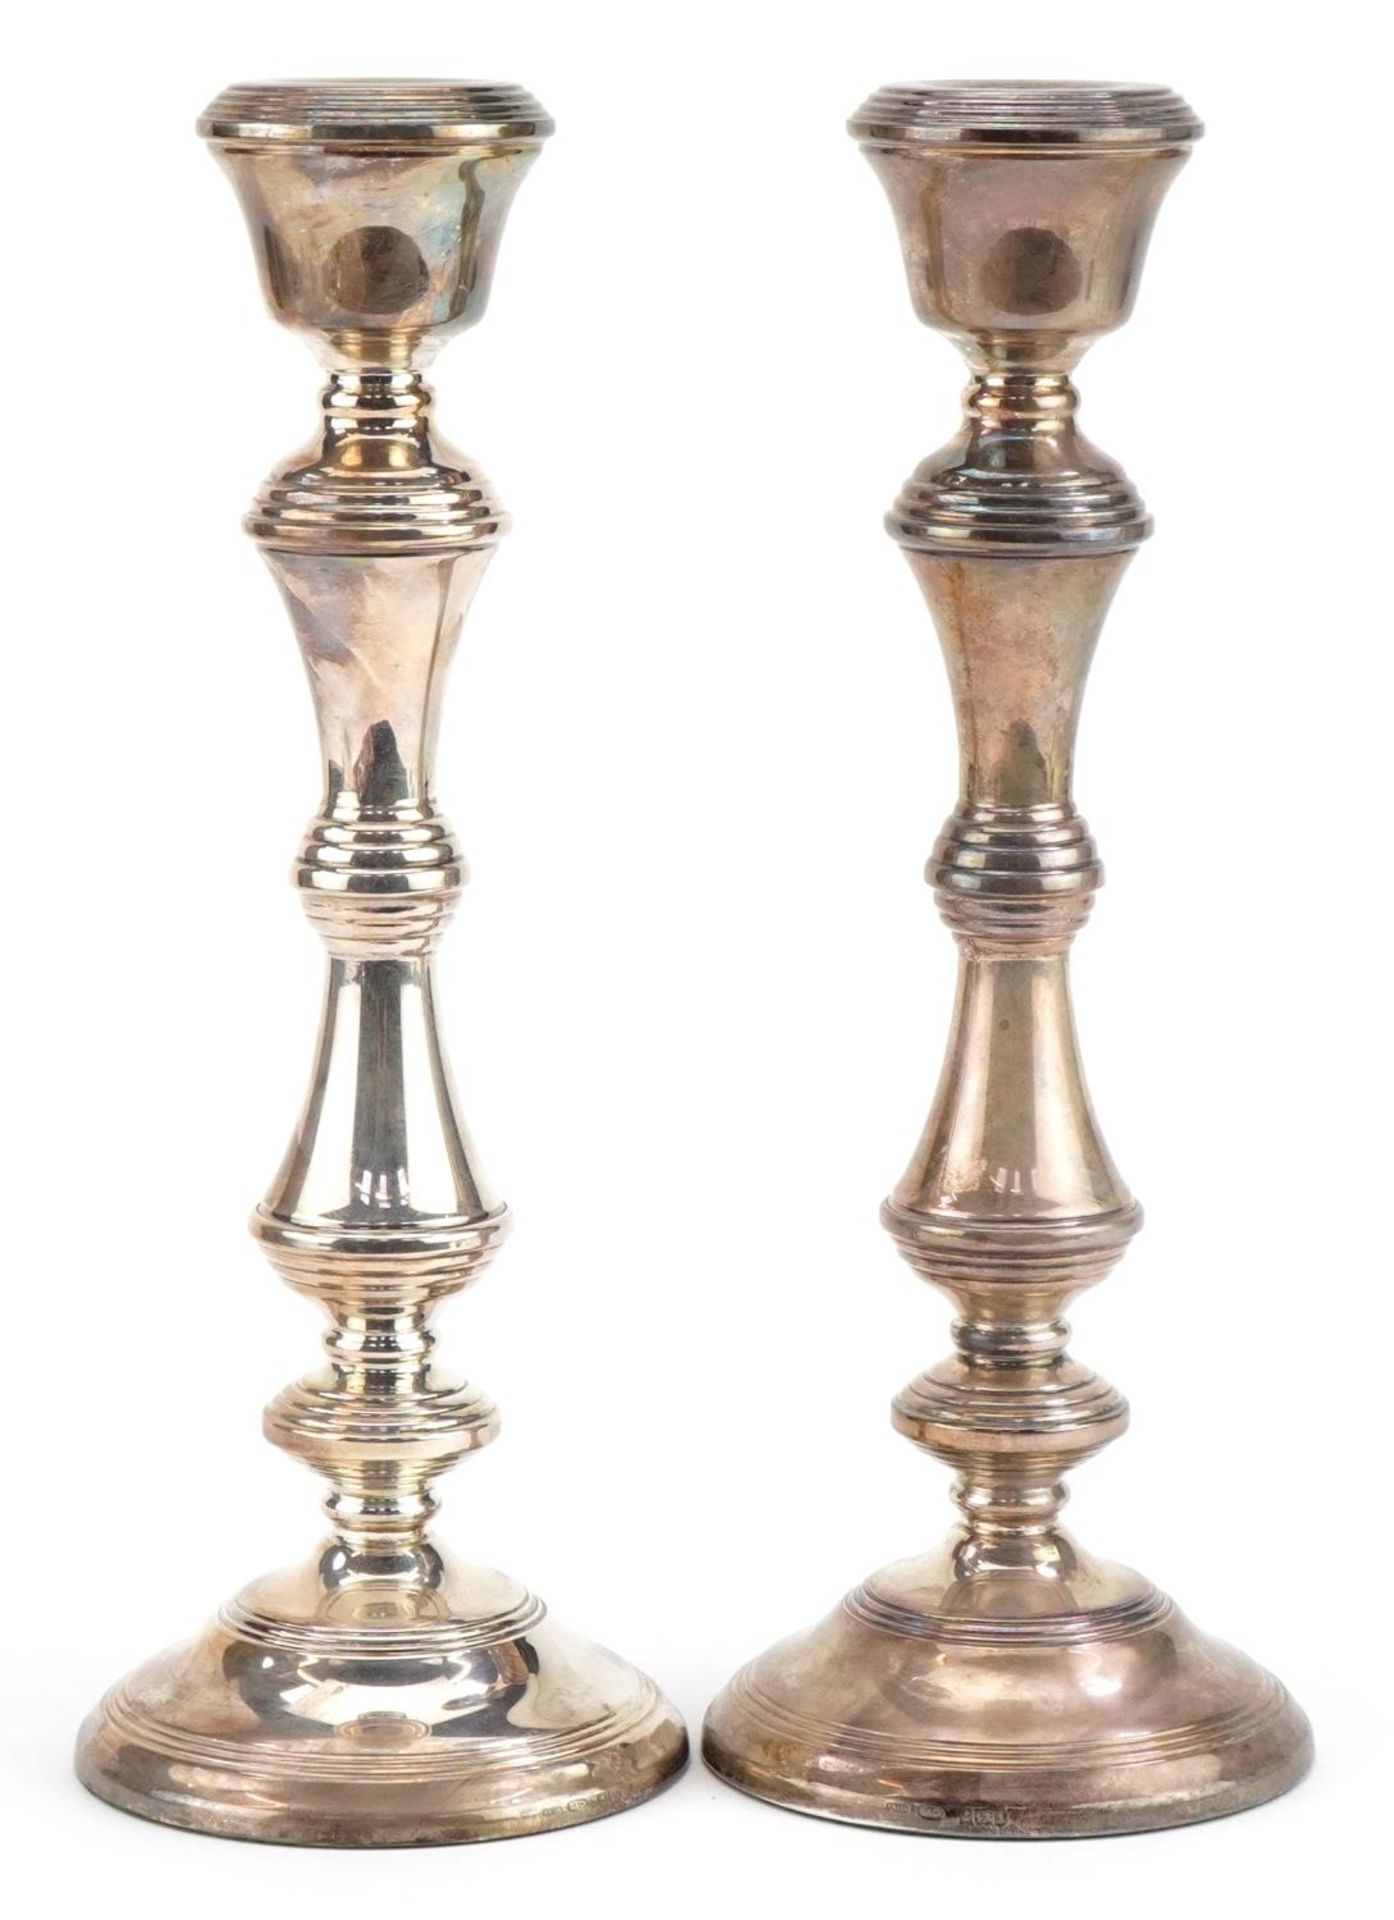 W I Broadway & Co, large pair of Elizabeth II silver filled candlesticks, one with British Petroleum - Image 2 of 4